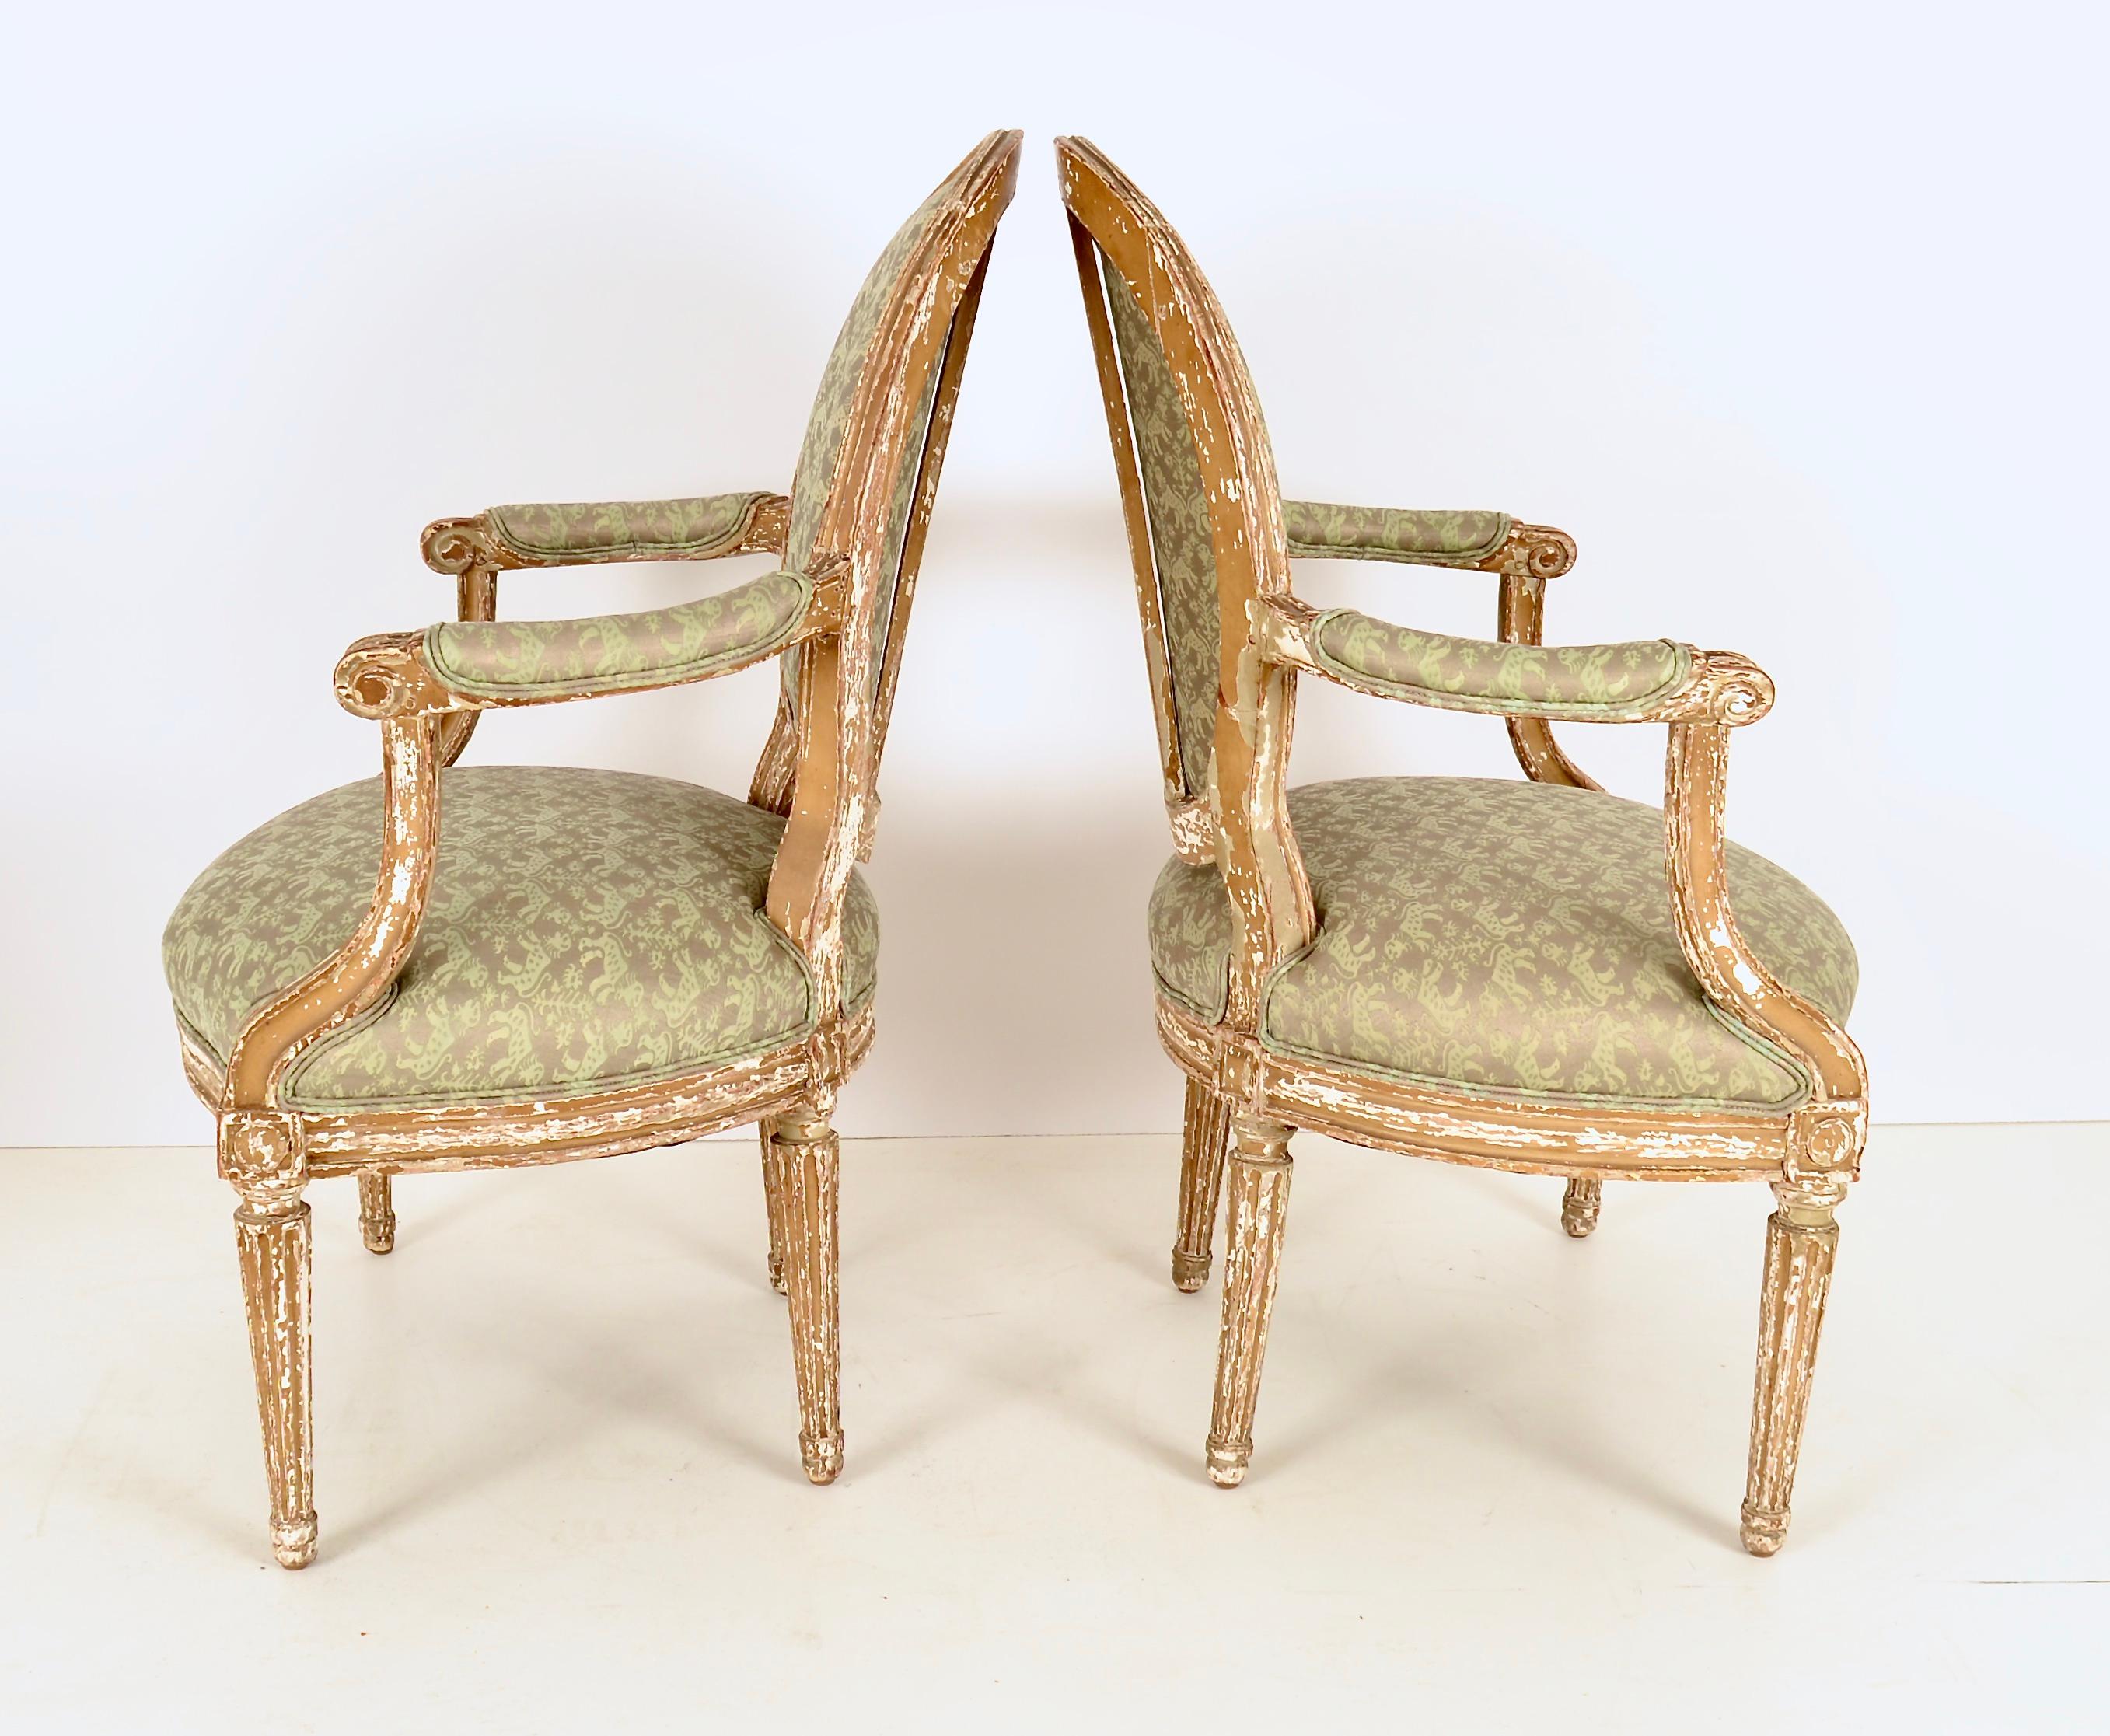 Charming pair of 19th century fauteuil chairs with attractive distressed paint finish. Now reupholstered in printed Fortuny fabric in soft green and gold.